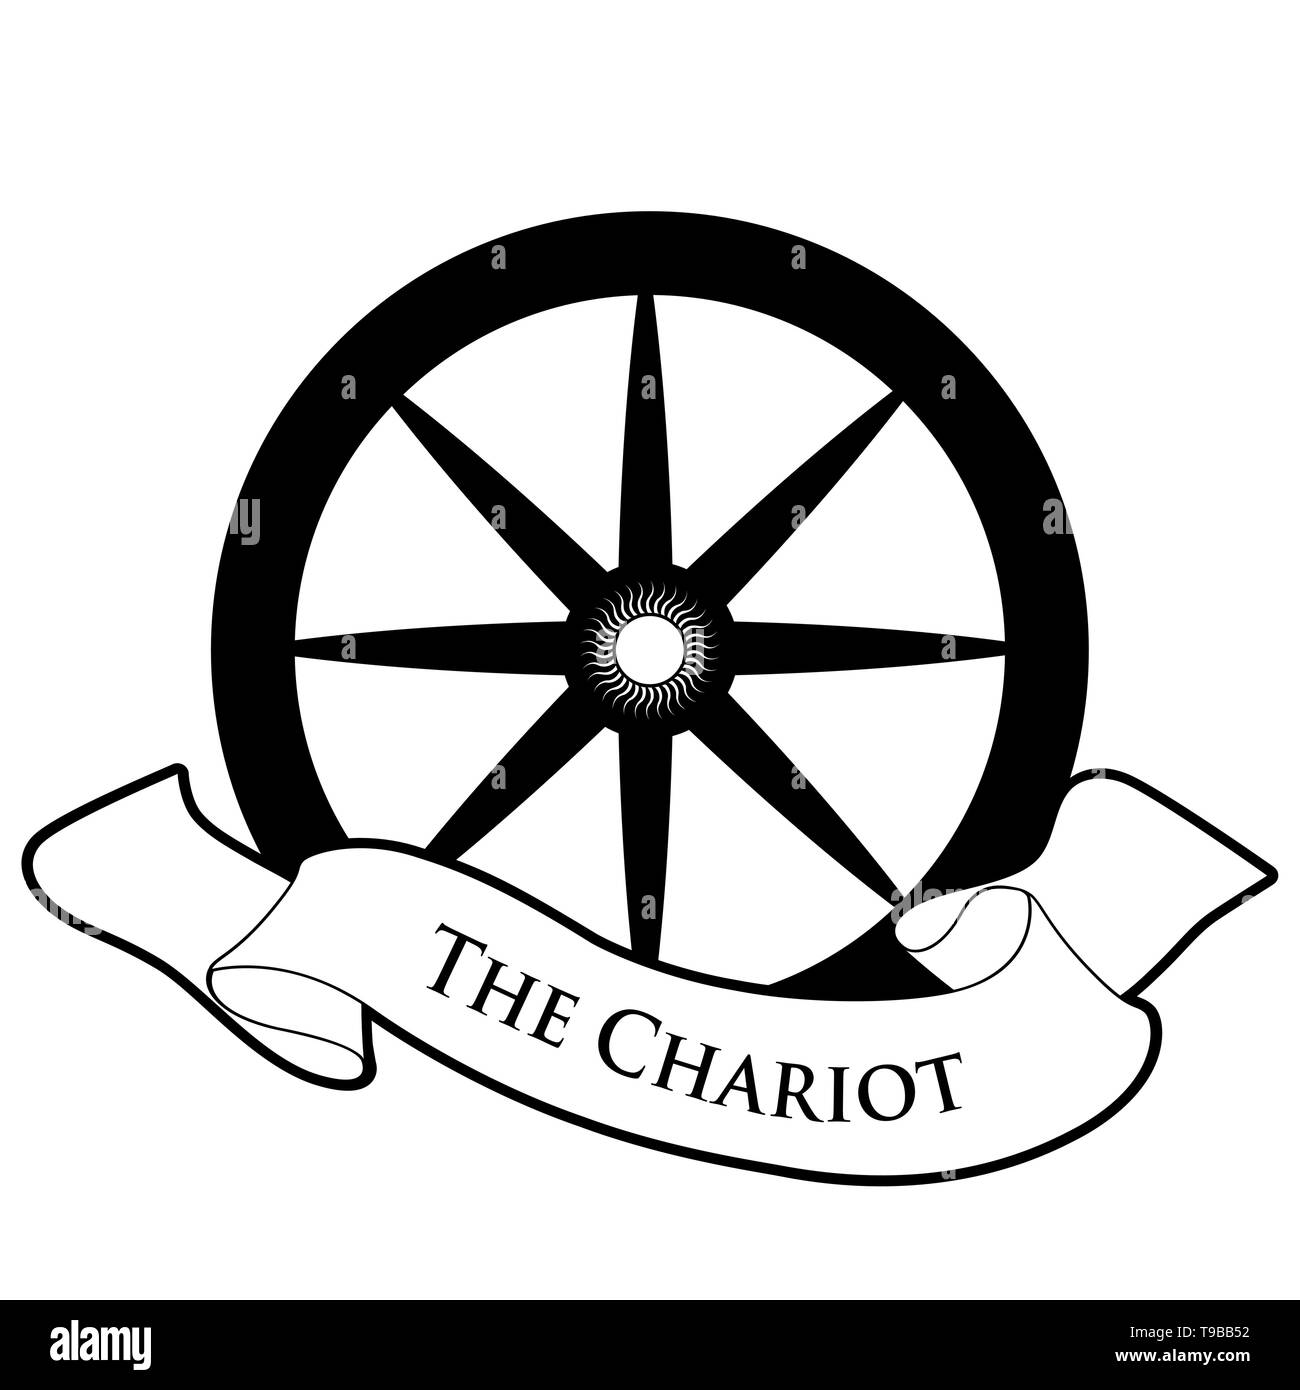 Tarot Card Concept. The Chariot. Cart wheel and text banner isolated on white background Stock Vector